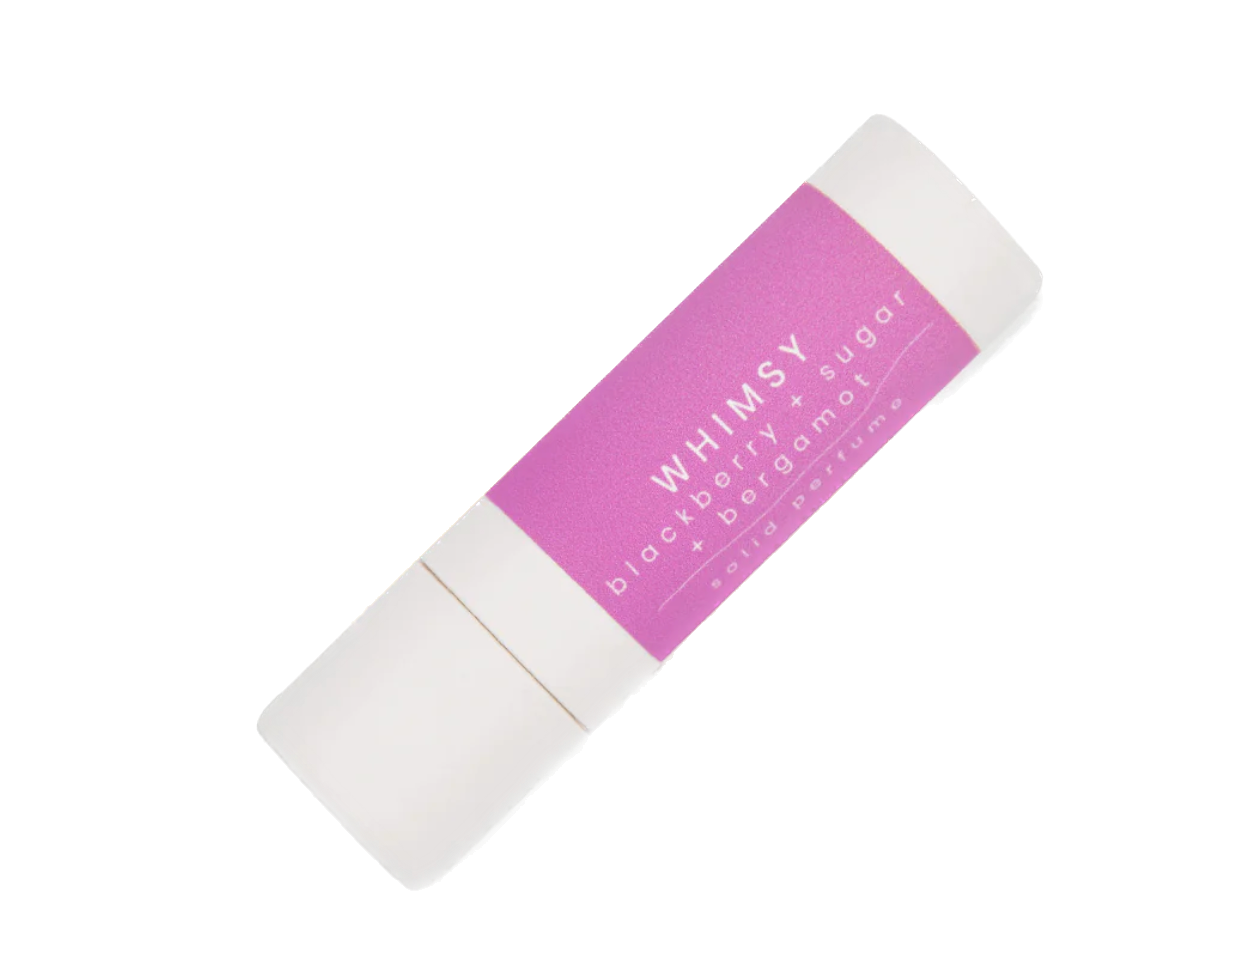 Whimsy Solid Perfume